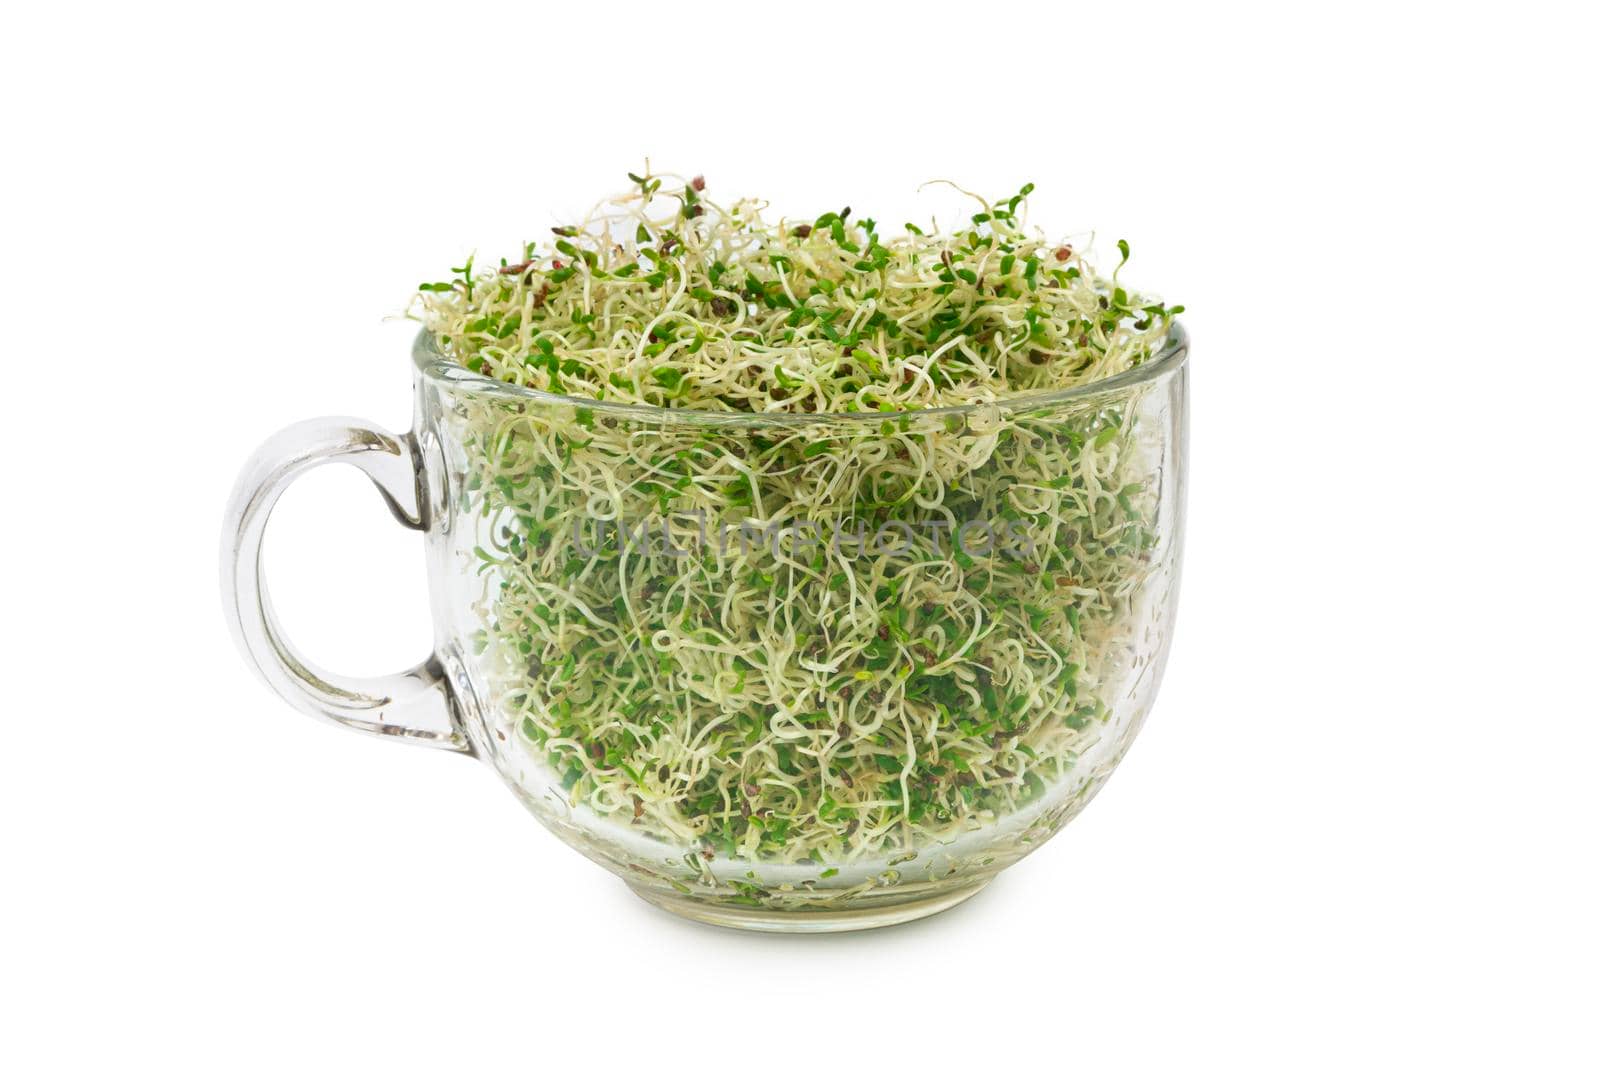 Organic young alfalfa sprouts in a glass on white background by SlayCer